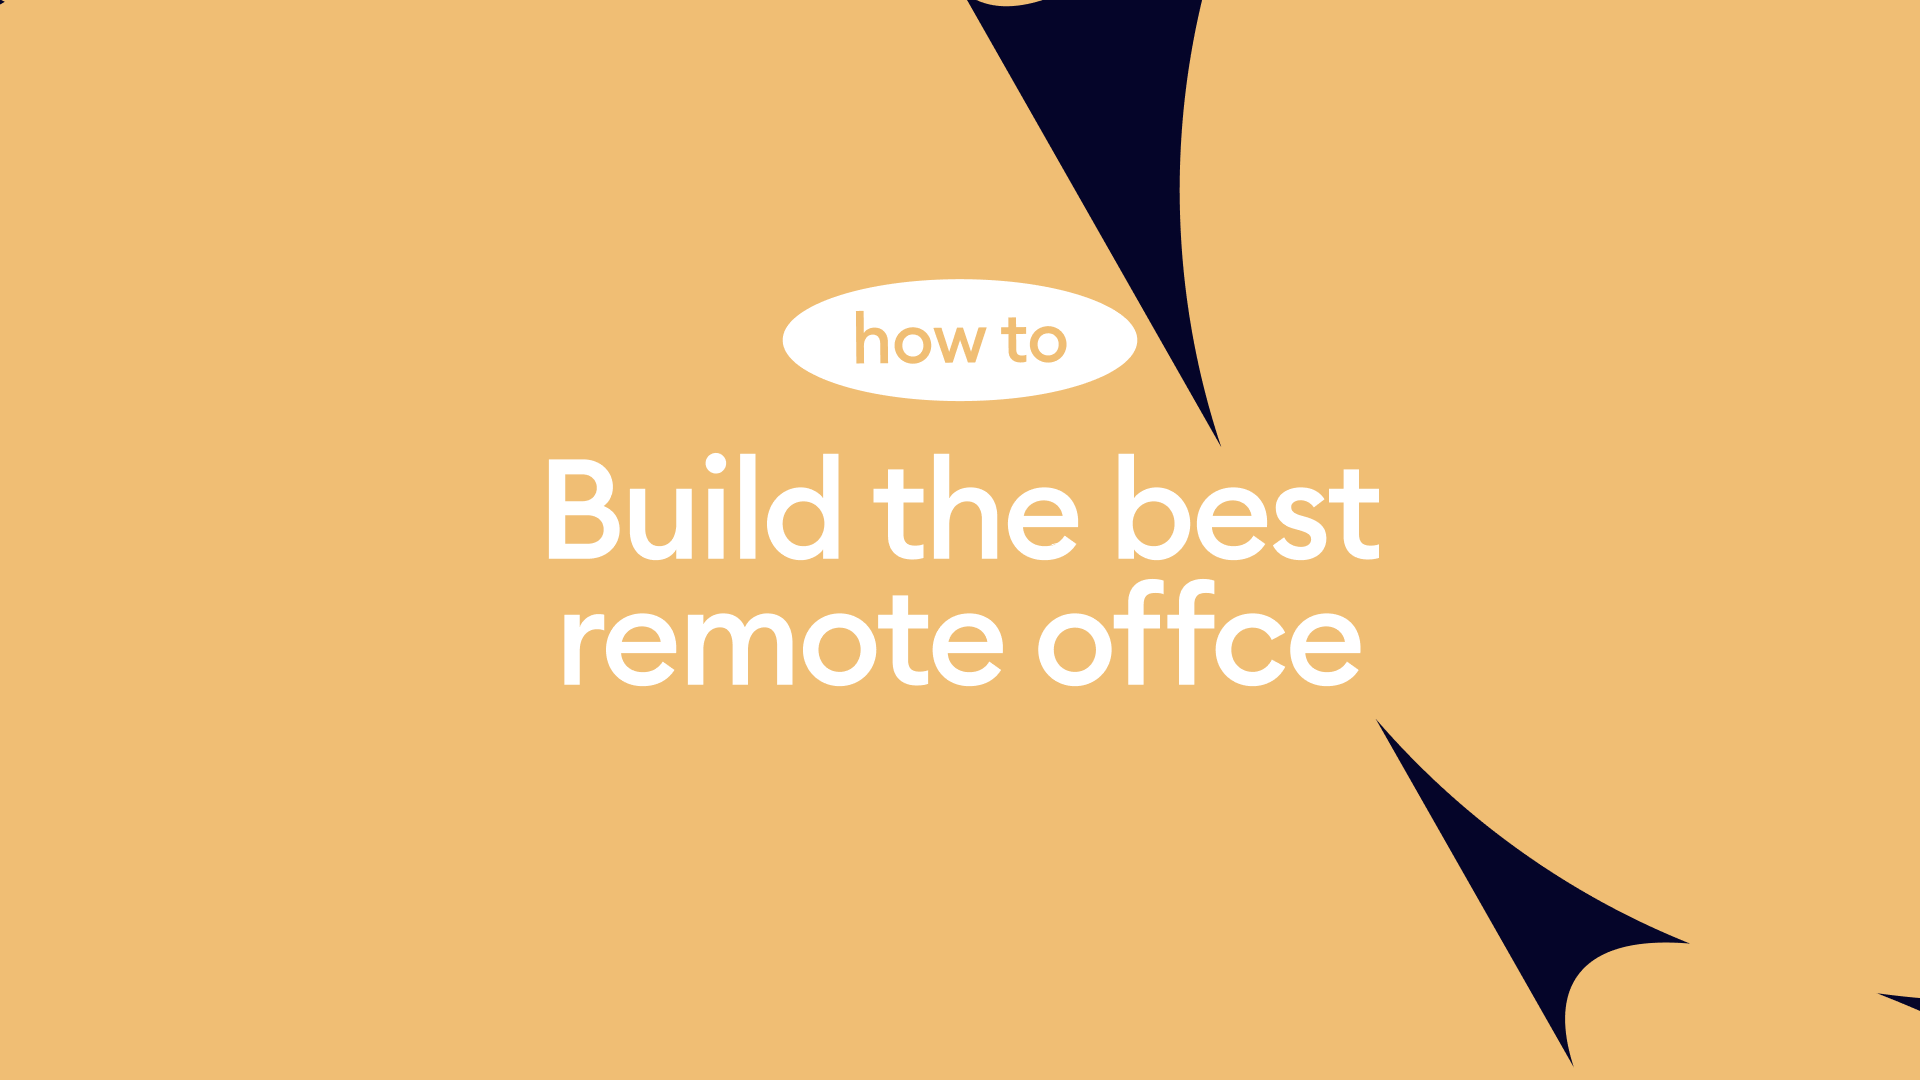 Build the best remote office by following this 4-step guide